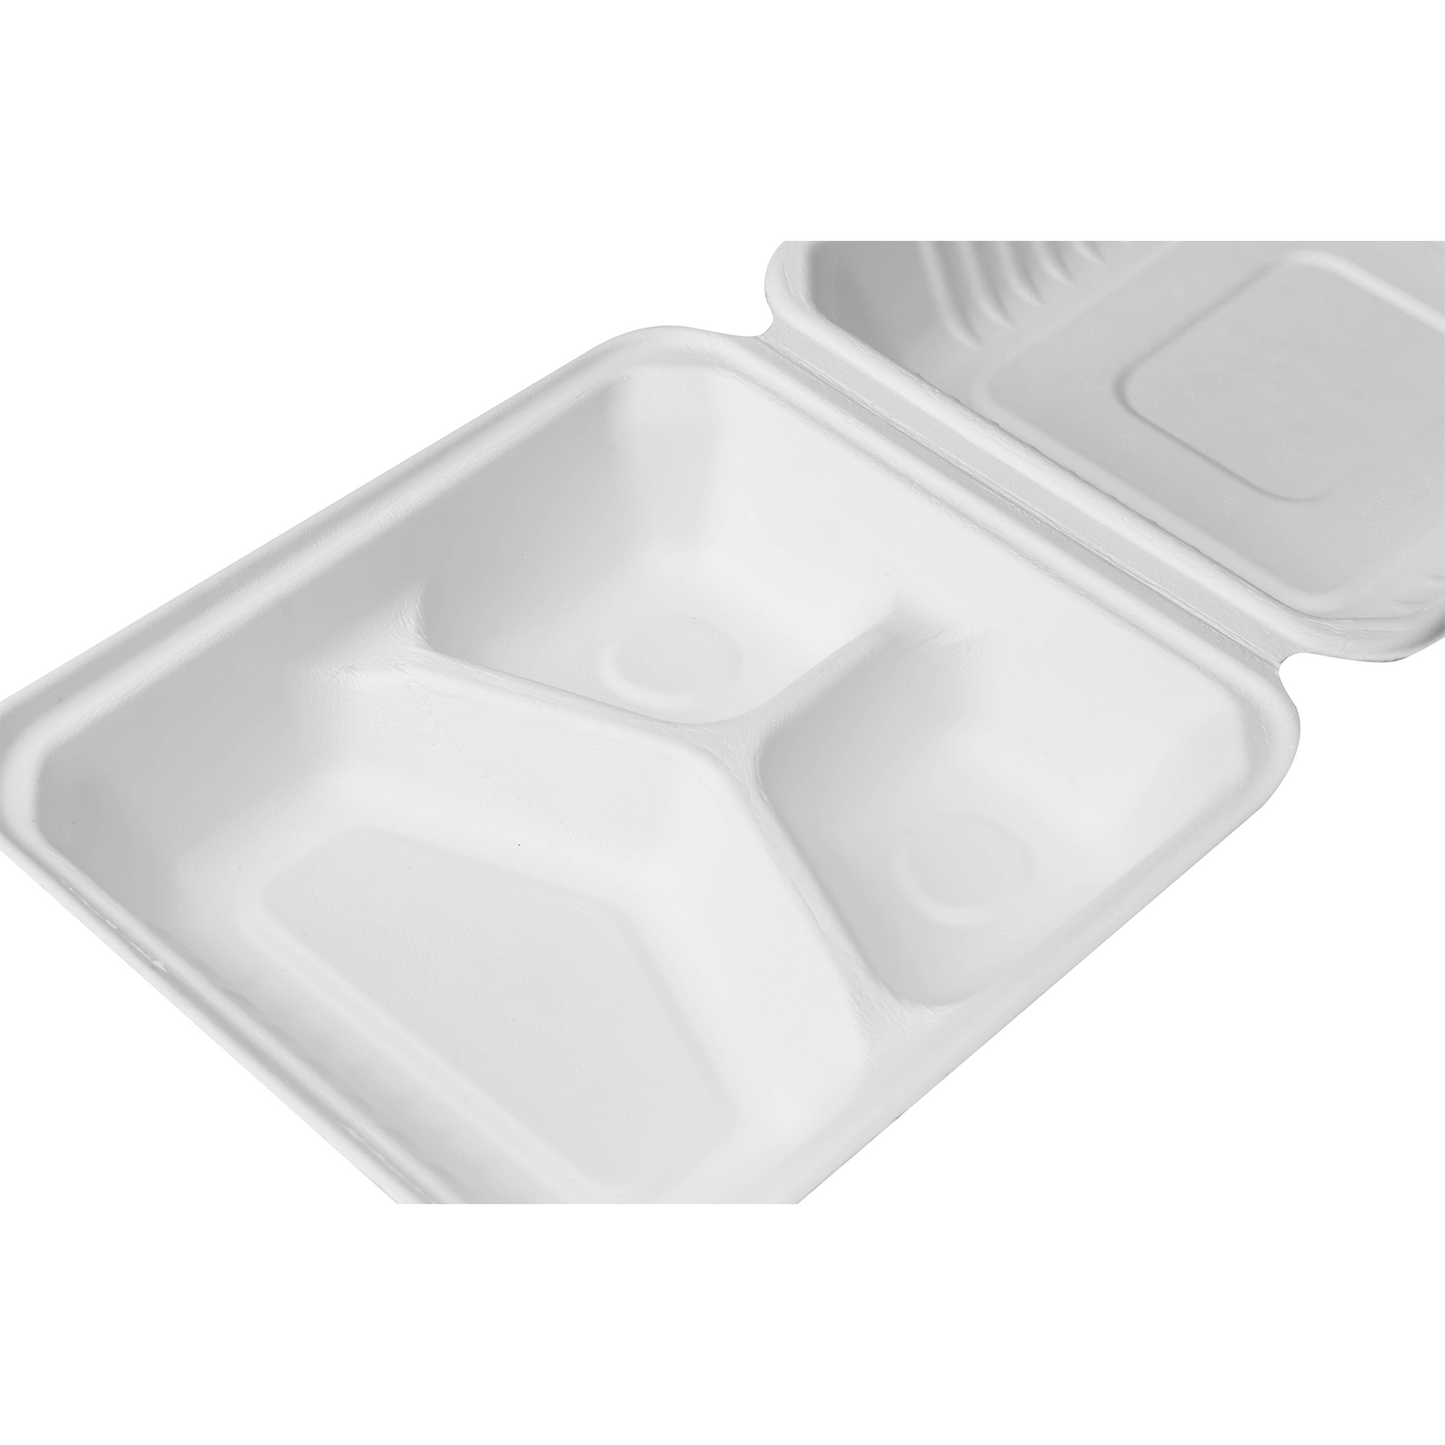 8"x8" Bagasse Hinged Container 3 Compartments